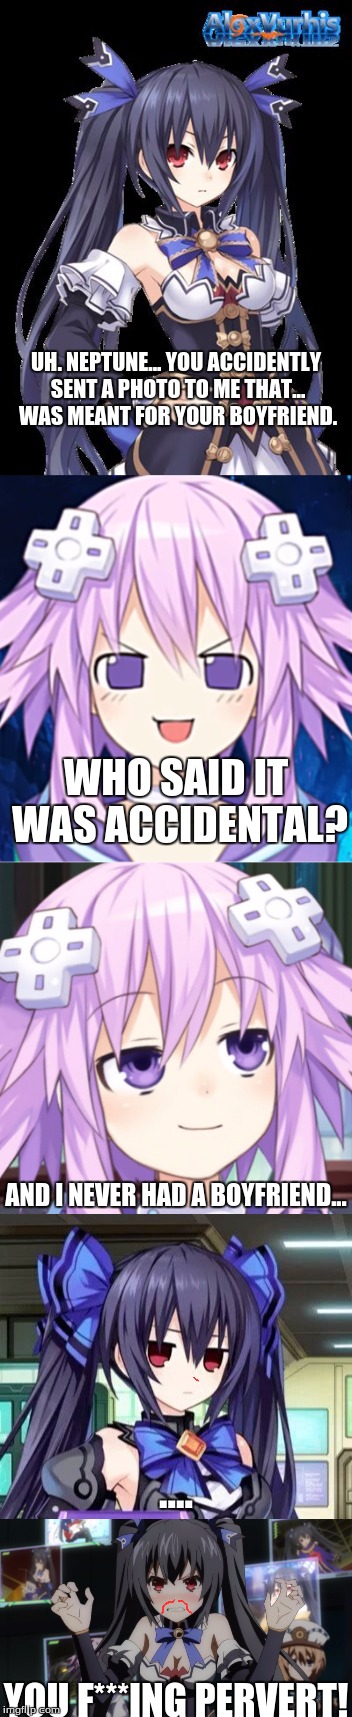 Inspired by Fox_Holmes' Ex Week Submission. | UH. NEPTUNE... YOU ACCIDENTLY SENT A PHOTO TO ME THAT... WAS MEANT FOR YOUR BOYFRIEND. WHO SAID IT WAS ACCIDENTAL? AND I NEVER HAD A BOYFRIEND... .... YOU F***ING PERVERT! | image tagged in yuri,hyperdimension neptunia,pervert,nepface,tsundere noire | made w/ Imgflip meme maker